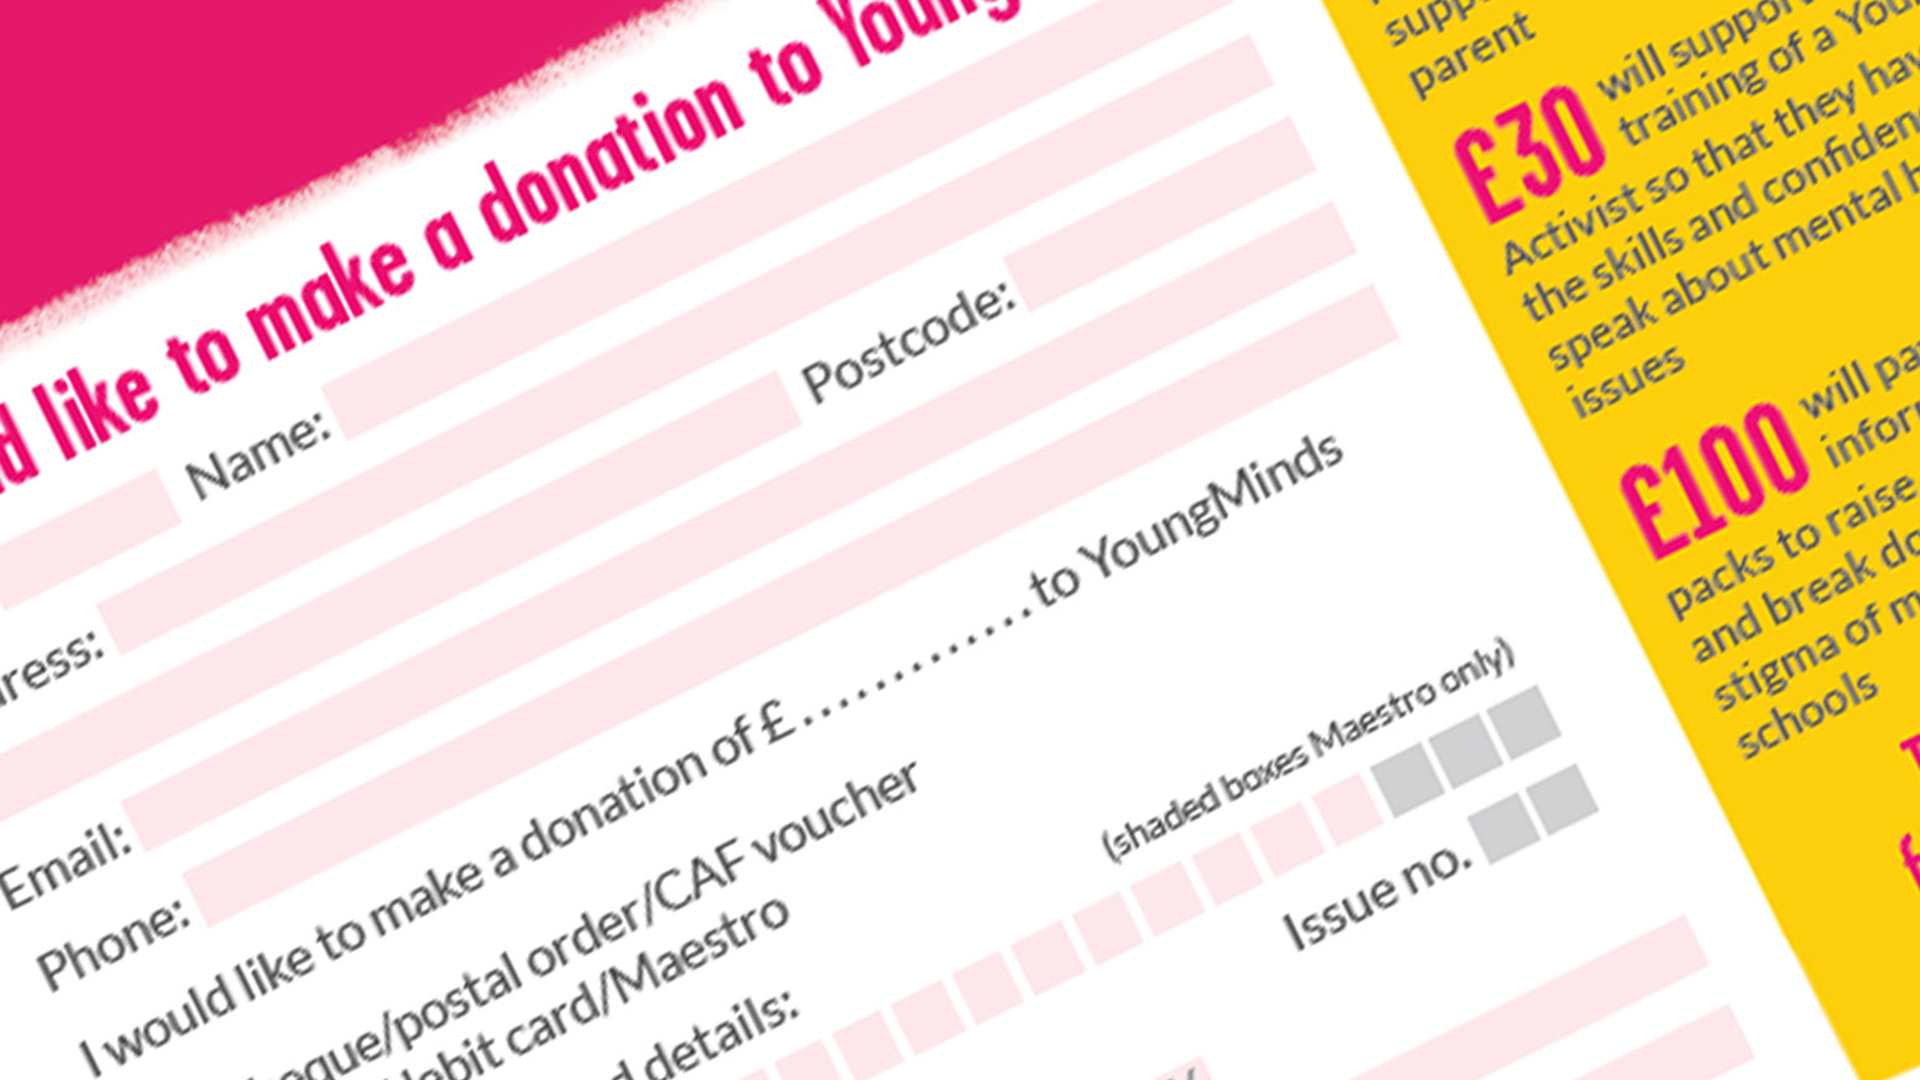 Cut out screenshot of our donation form. The cut out zooms in on the personal details section of the form.